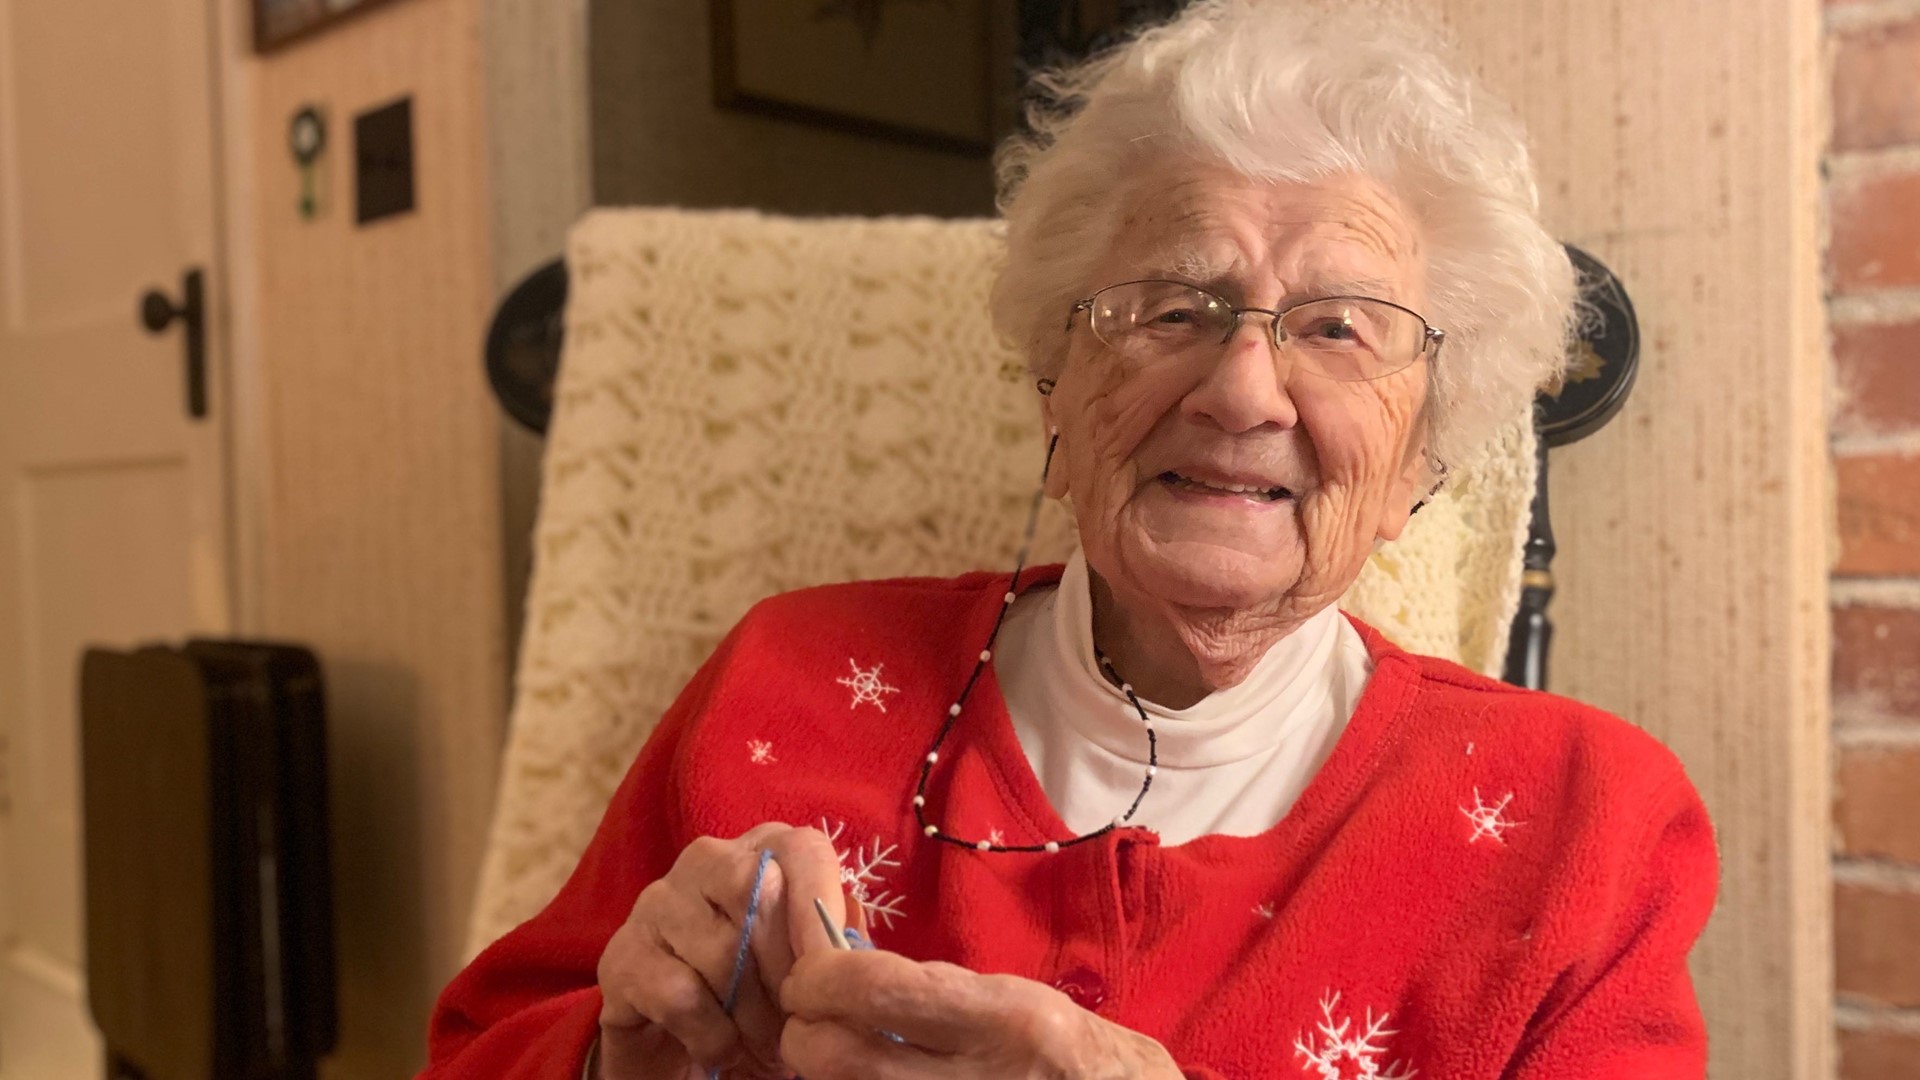 Dottie Brown of Lewiston has been knitting for more than a century. Her mother taught her when she was 4-years-old in 1919.